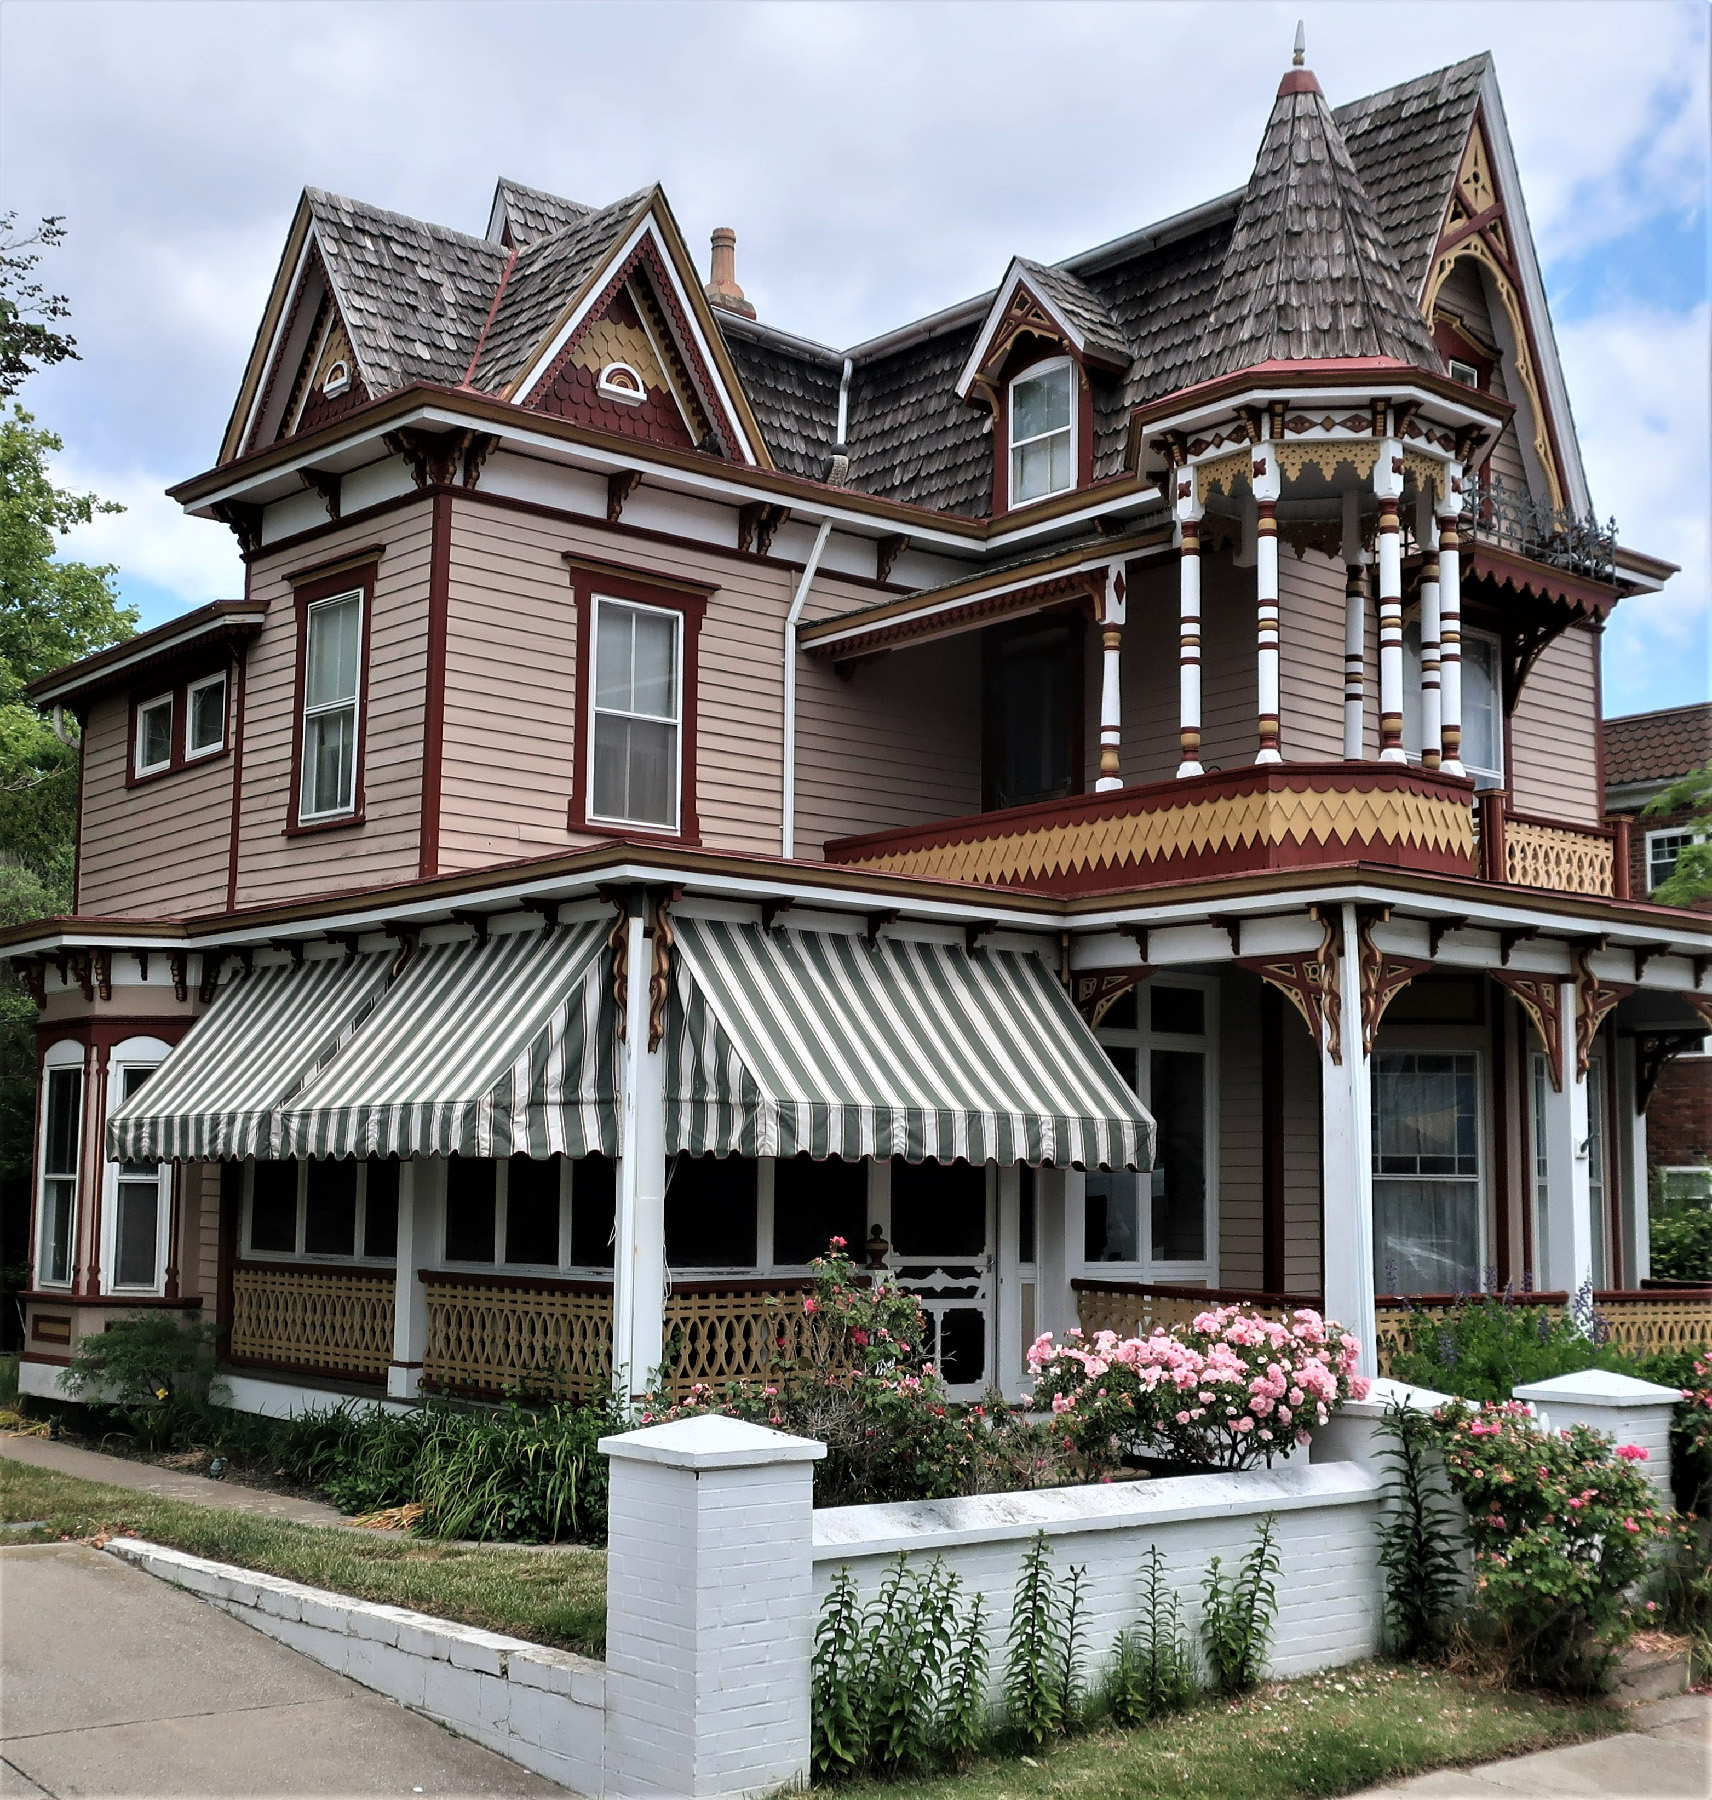 Victorian homes in Cape May, New Jersey, have helped the city reach National Historic Landmark status.